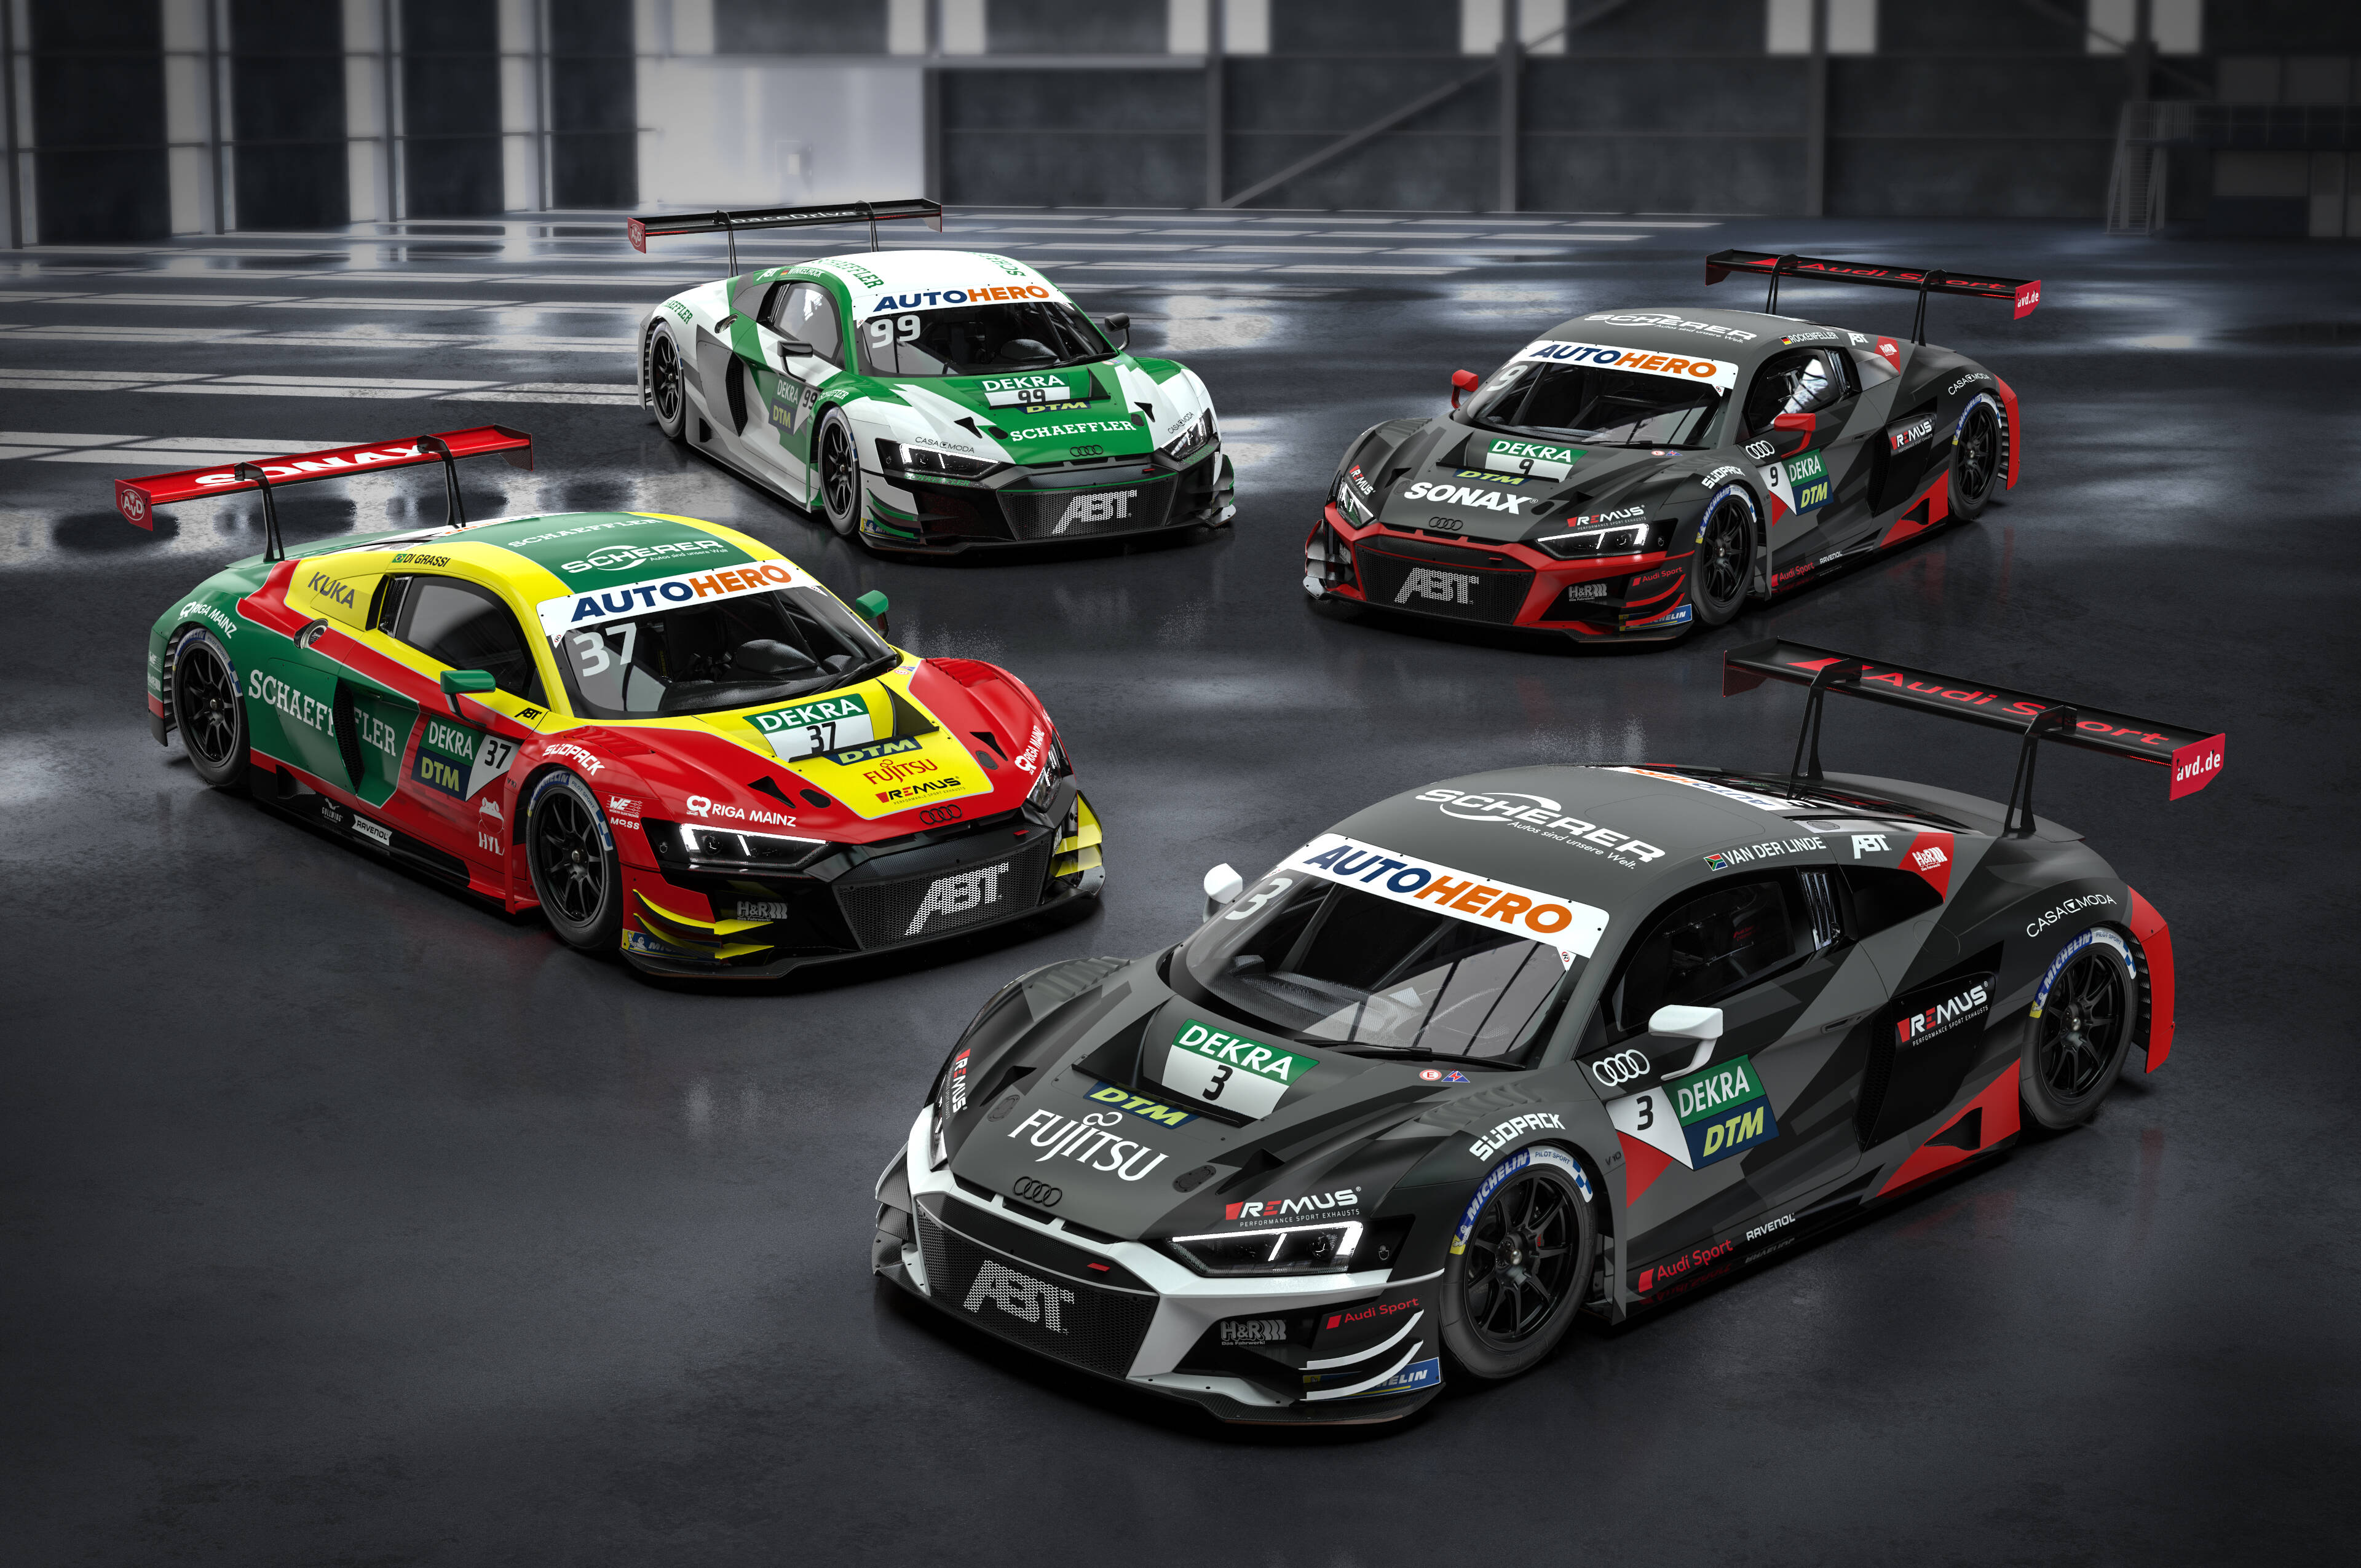 Audi Sport on X: .@abtmotorsport is returning to the @DTM in 2021 with two  Audi R8 LMS entries. The driver line-up includes two Audi Sport drivers:  2013 #DTM champion Mike Rockenfeller and @